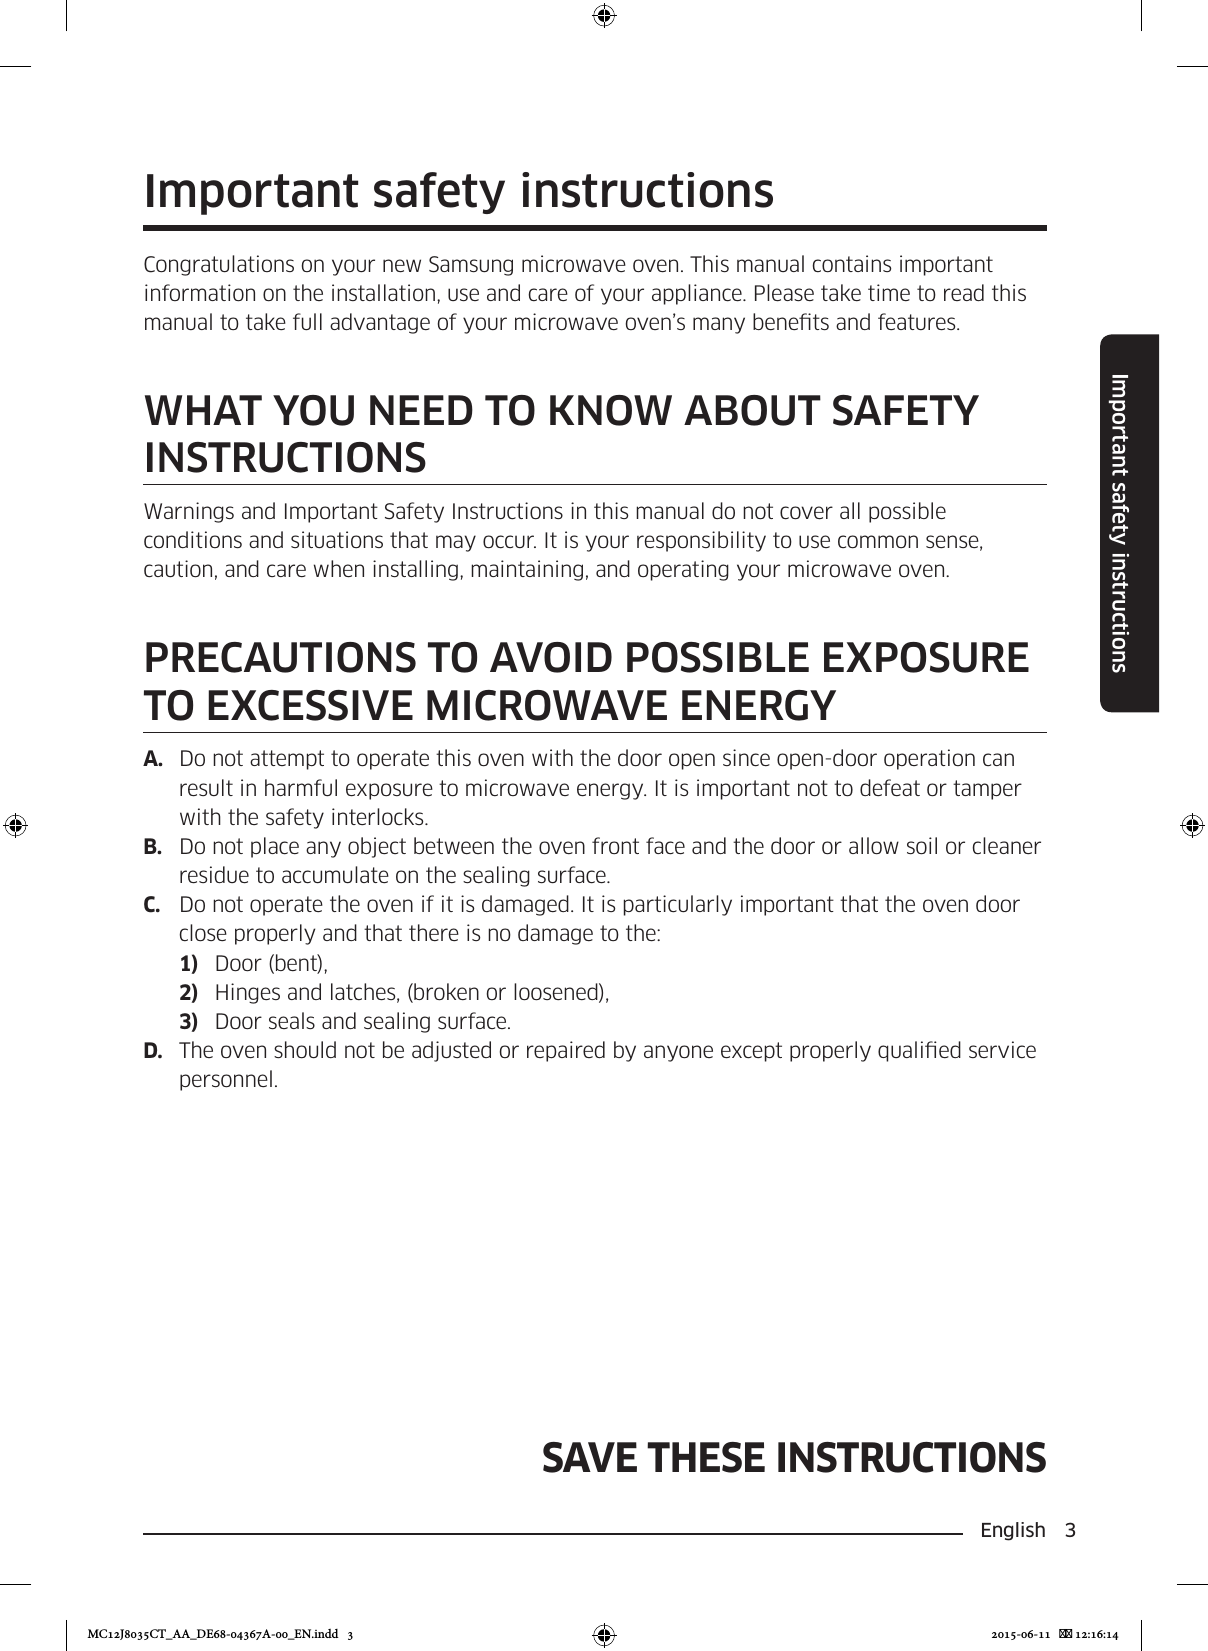 English  3Important safety instructionsSAVE THESE INSTRUCTIONSImportant safety instructionsCongratulations on your new Samsung microwave oven. This manual contains important information on the installation, use and care of your appliance. Please take time to read this manual to take full advantage of your microwave oven’s many benets and features.WHAT YOU NEED TO KNOW ABOUT SAFETY INSTRUCTIONSWarnings and Important Safety Instructions in this manual do not cover all possible conditions and situations that may occur. It is your responsibility to use common sense, caution, and care when installing, maintaining, and operating your microwave oven.PRECAUTIONS TO AVOID POSSIBLE EXPOSURE TO EXCESSIVE MICROWAVE ENERGYA.  Do not attempt to operate this oven with the door open since open-door operation can result in harmful exposure to microwave energy. It is important not to defeat or tamper with the safety interlocks.B.  Do not place any object between the oven front face and the door or allow soil or cleaner residue to accumulate on the sealing surface.C.  Do not operate the oven if it is damaged. It is particularly important that the oven door close properly and that there is no damage to the:1)  Door (bent),2)  Hinges and latches, (broken or loosened),3)  Door seals and sealing surface.D.  The oven should not be adjusted or repaired by anyone except properly qualied service personnel.MC12J8035CT_AA_DE68-04367A-00_EN.indd   3 2015-06-11    12:16:14